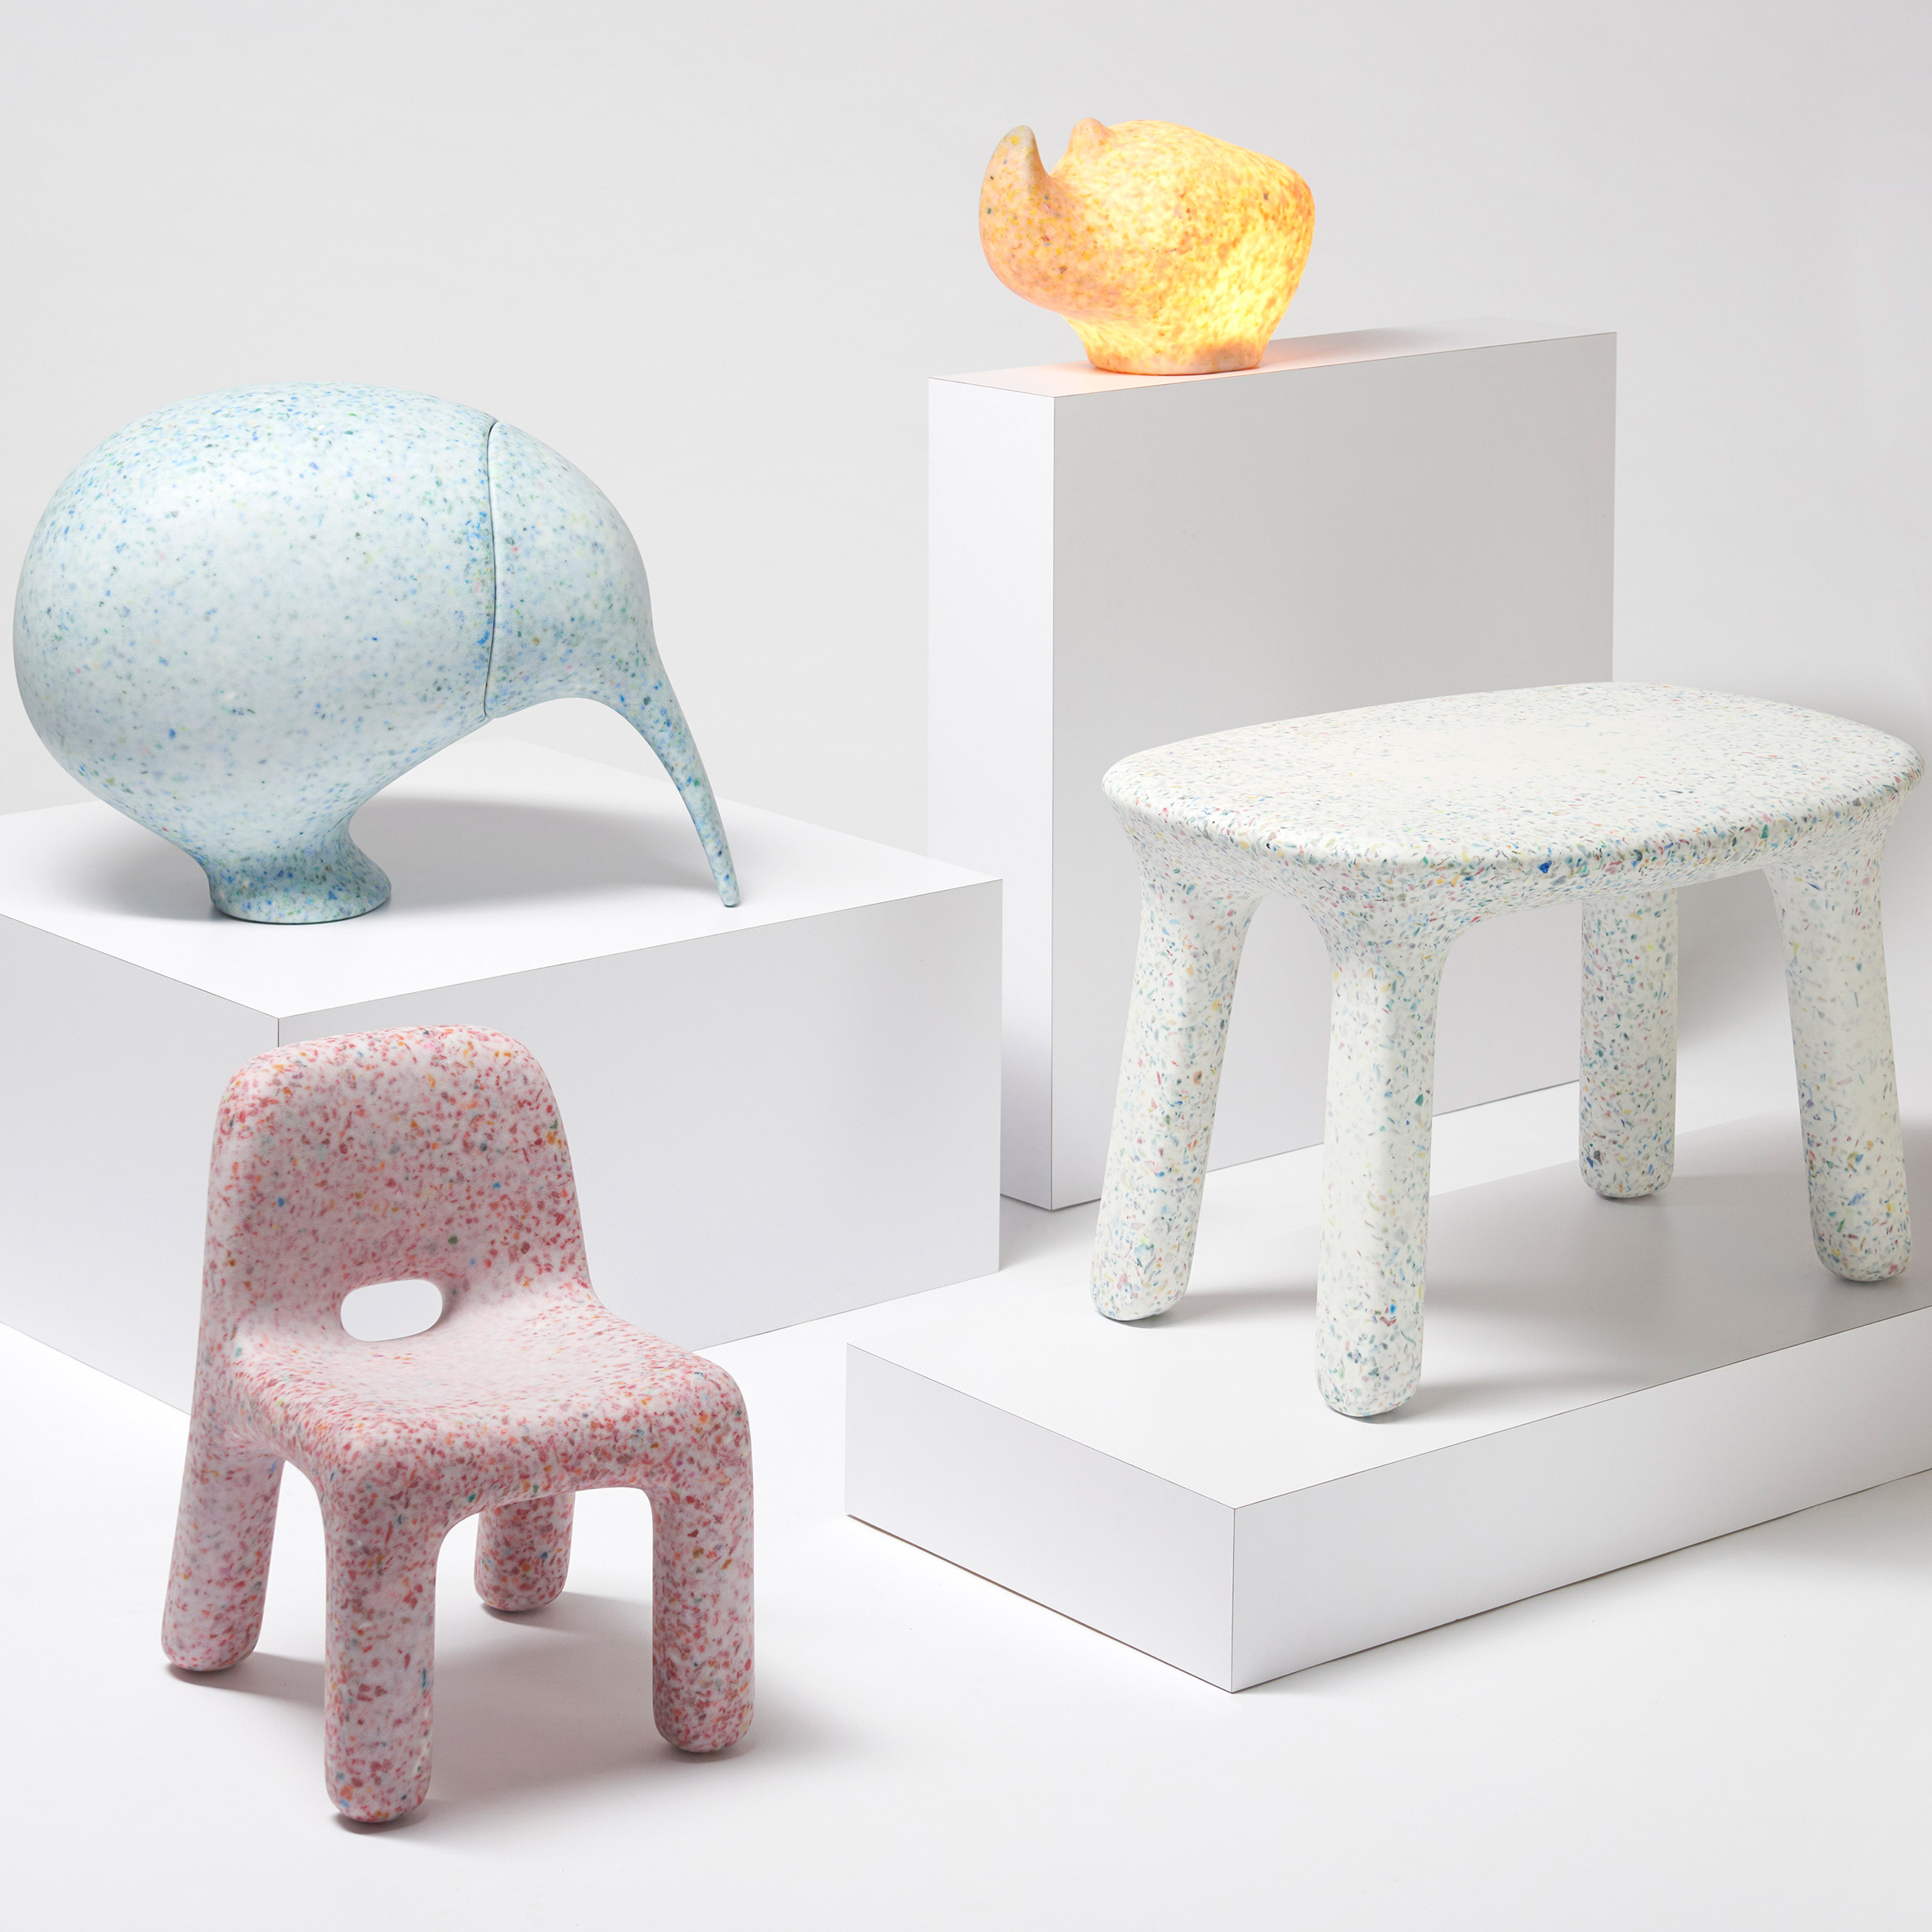 Plastic Furniture Made From Old Toys Introduces Kids To The